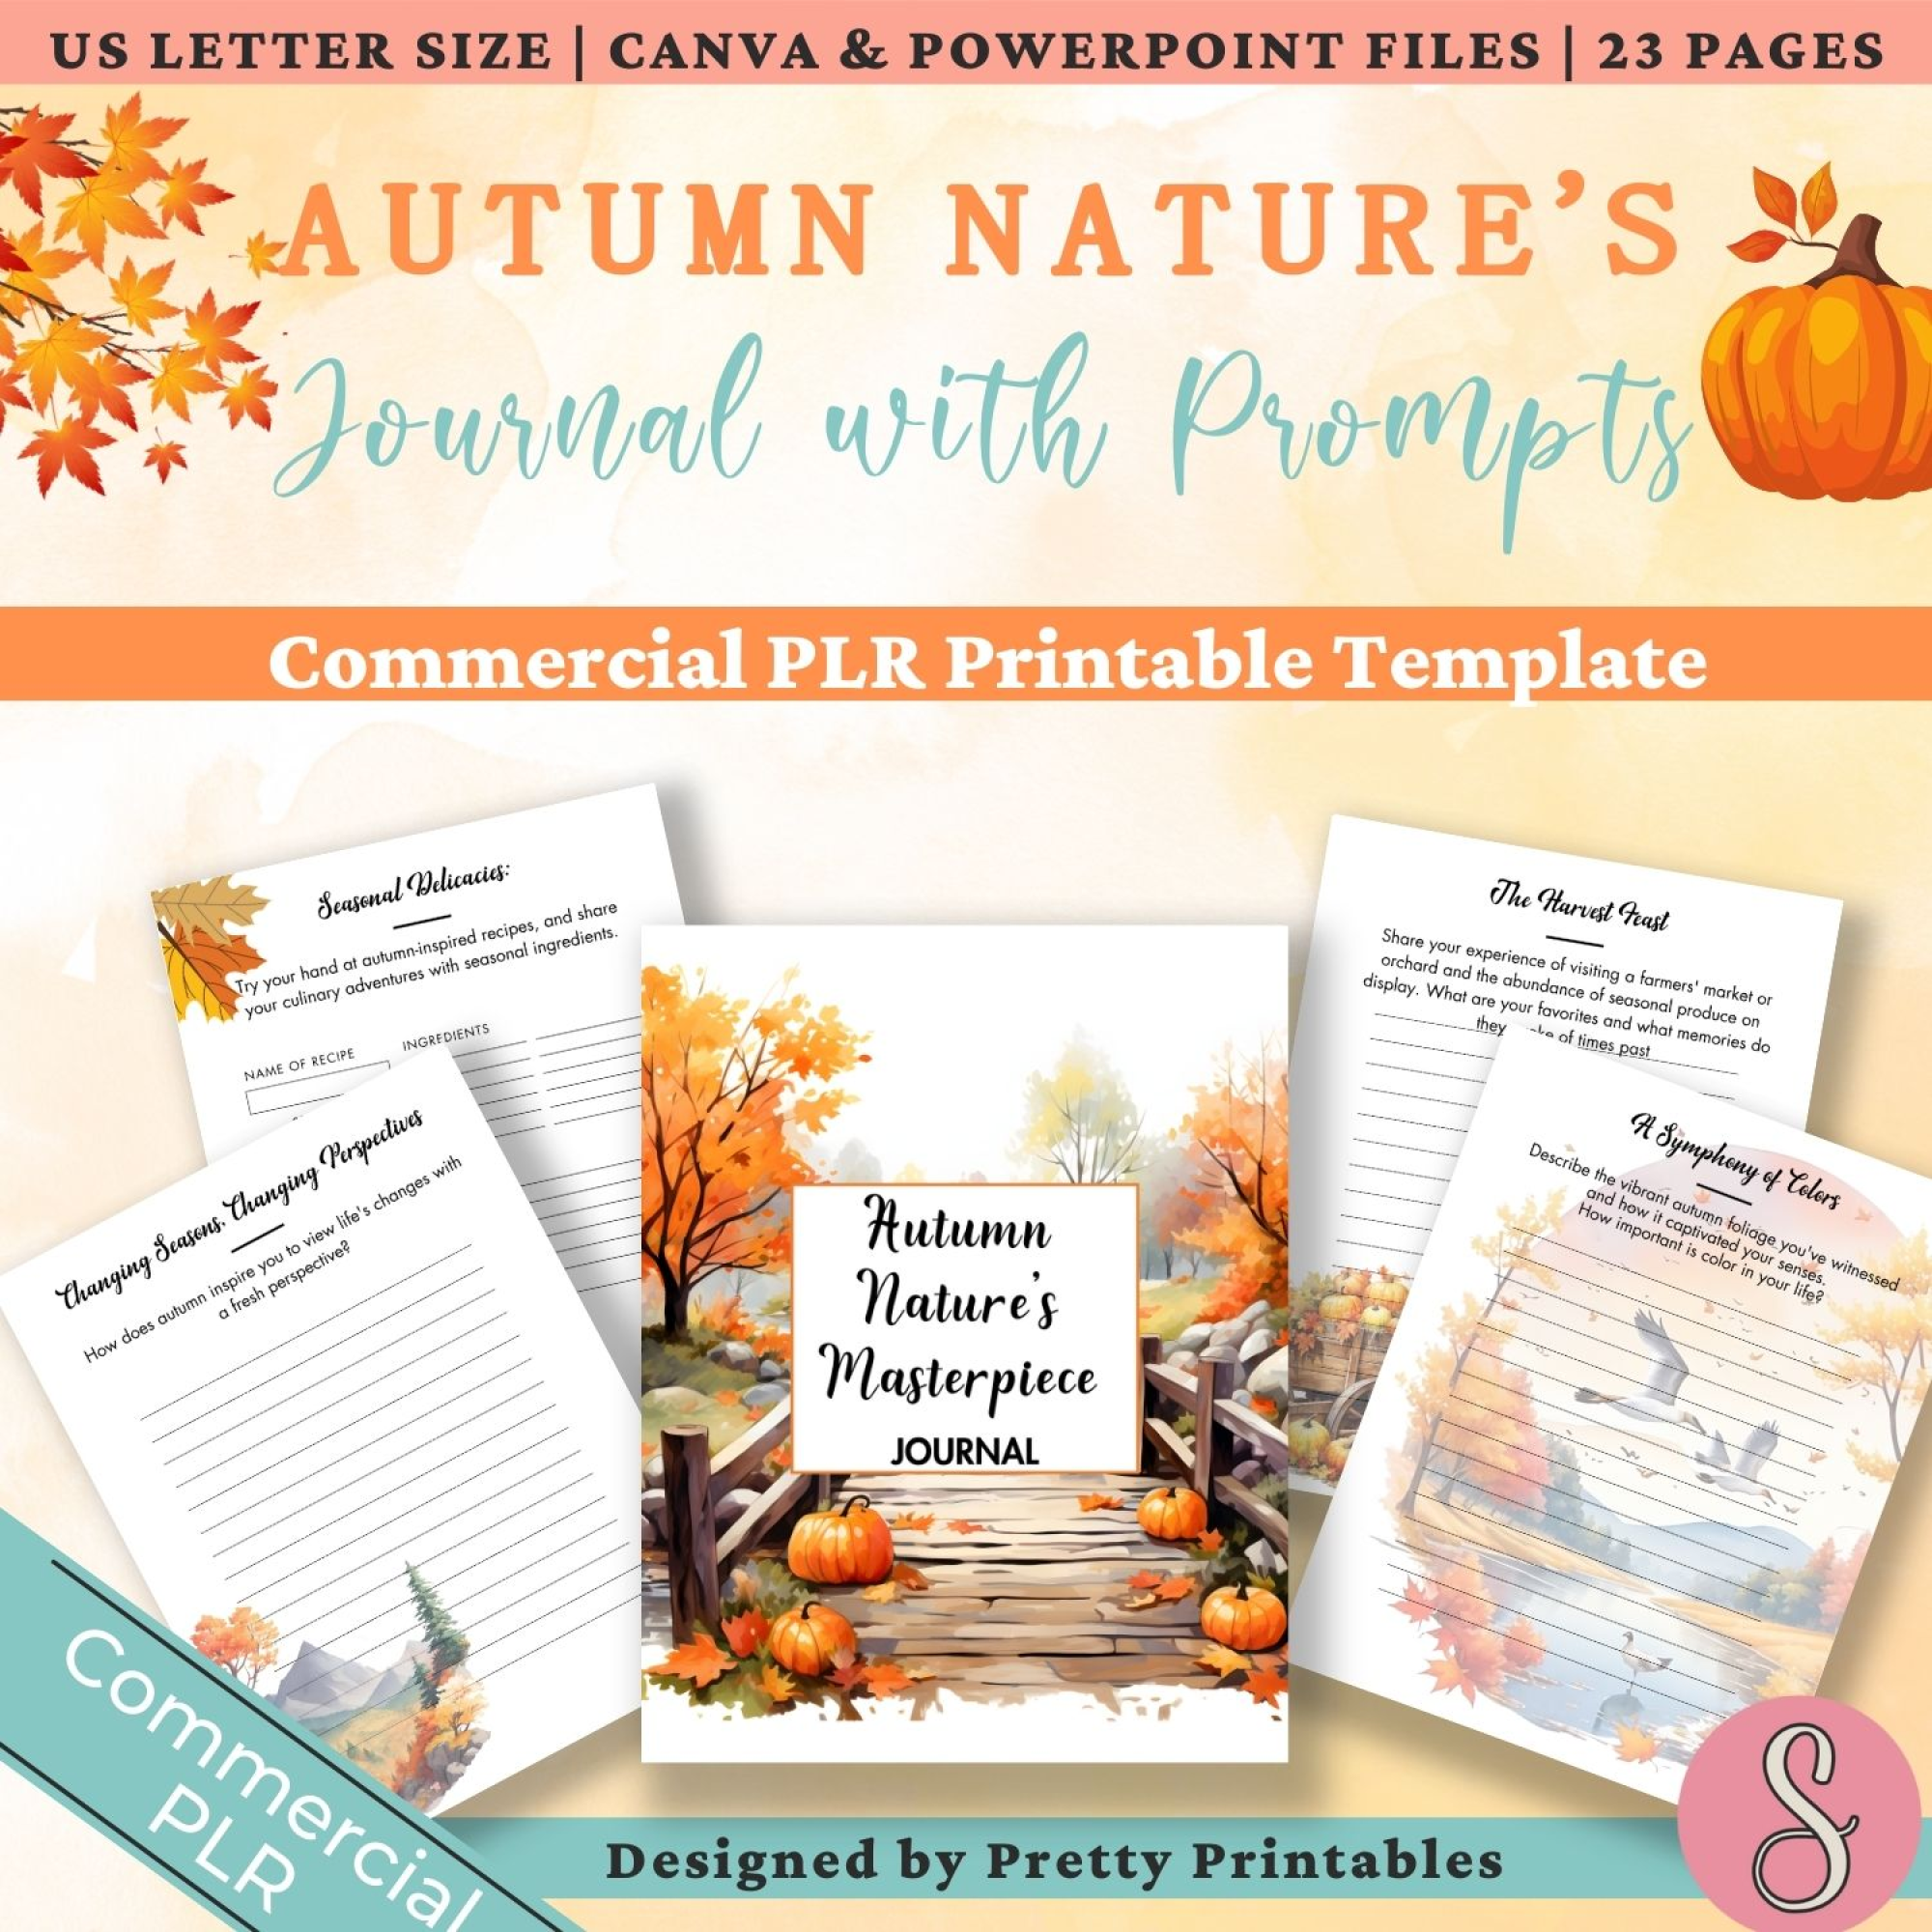 Autumn Nature's Masterpiece Journal with Prompts PLR